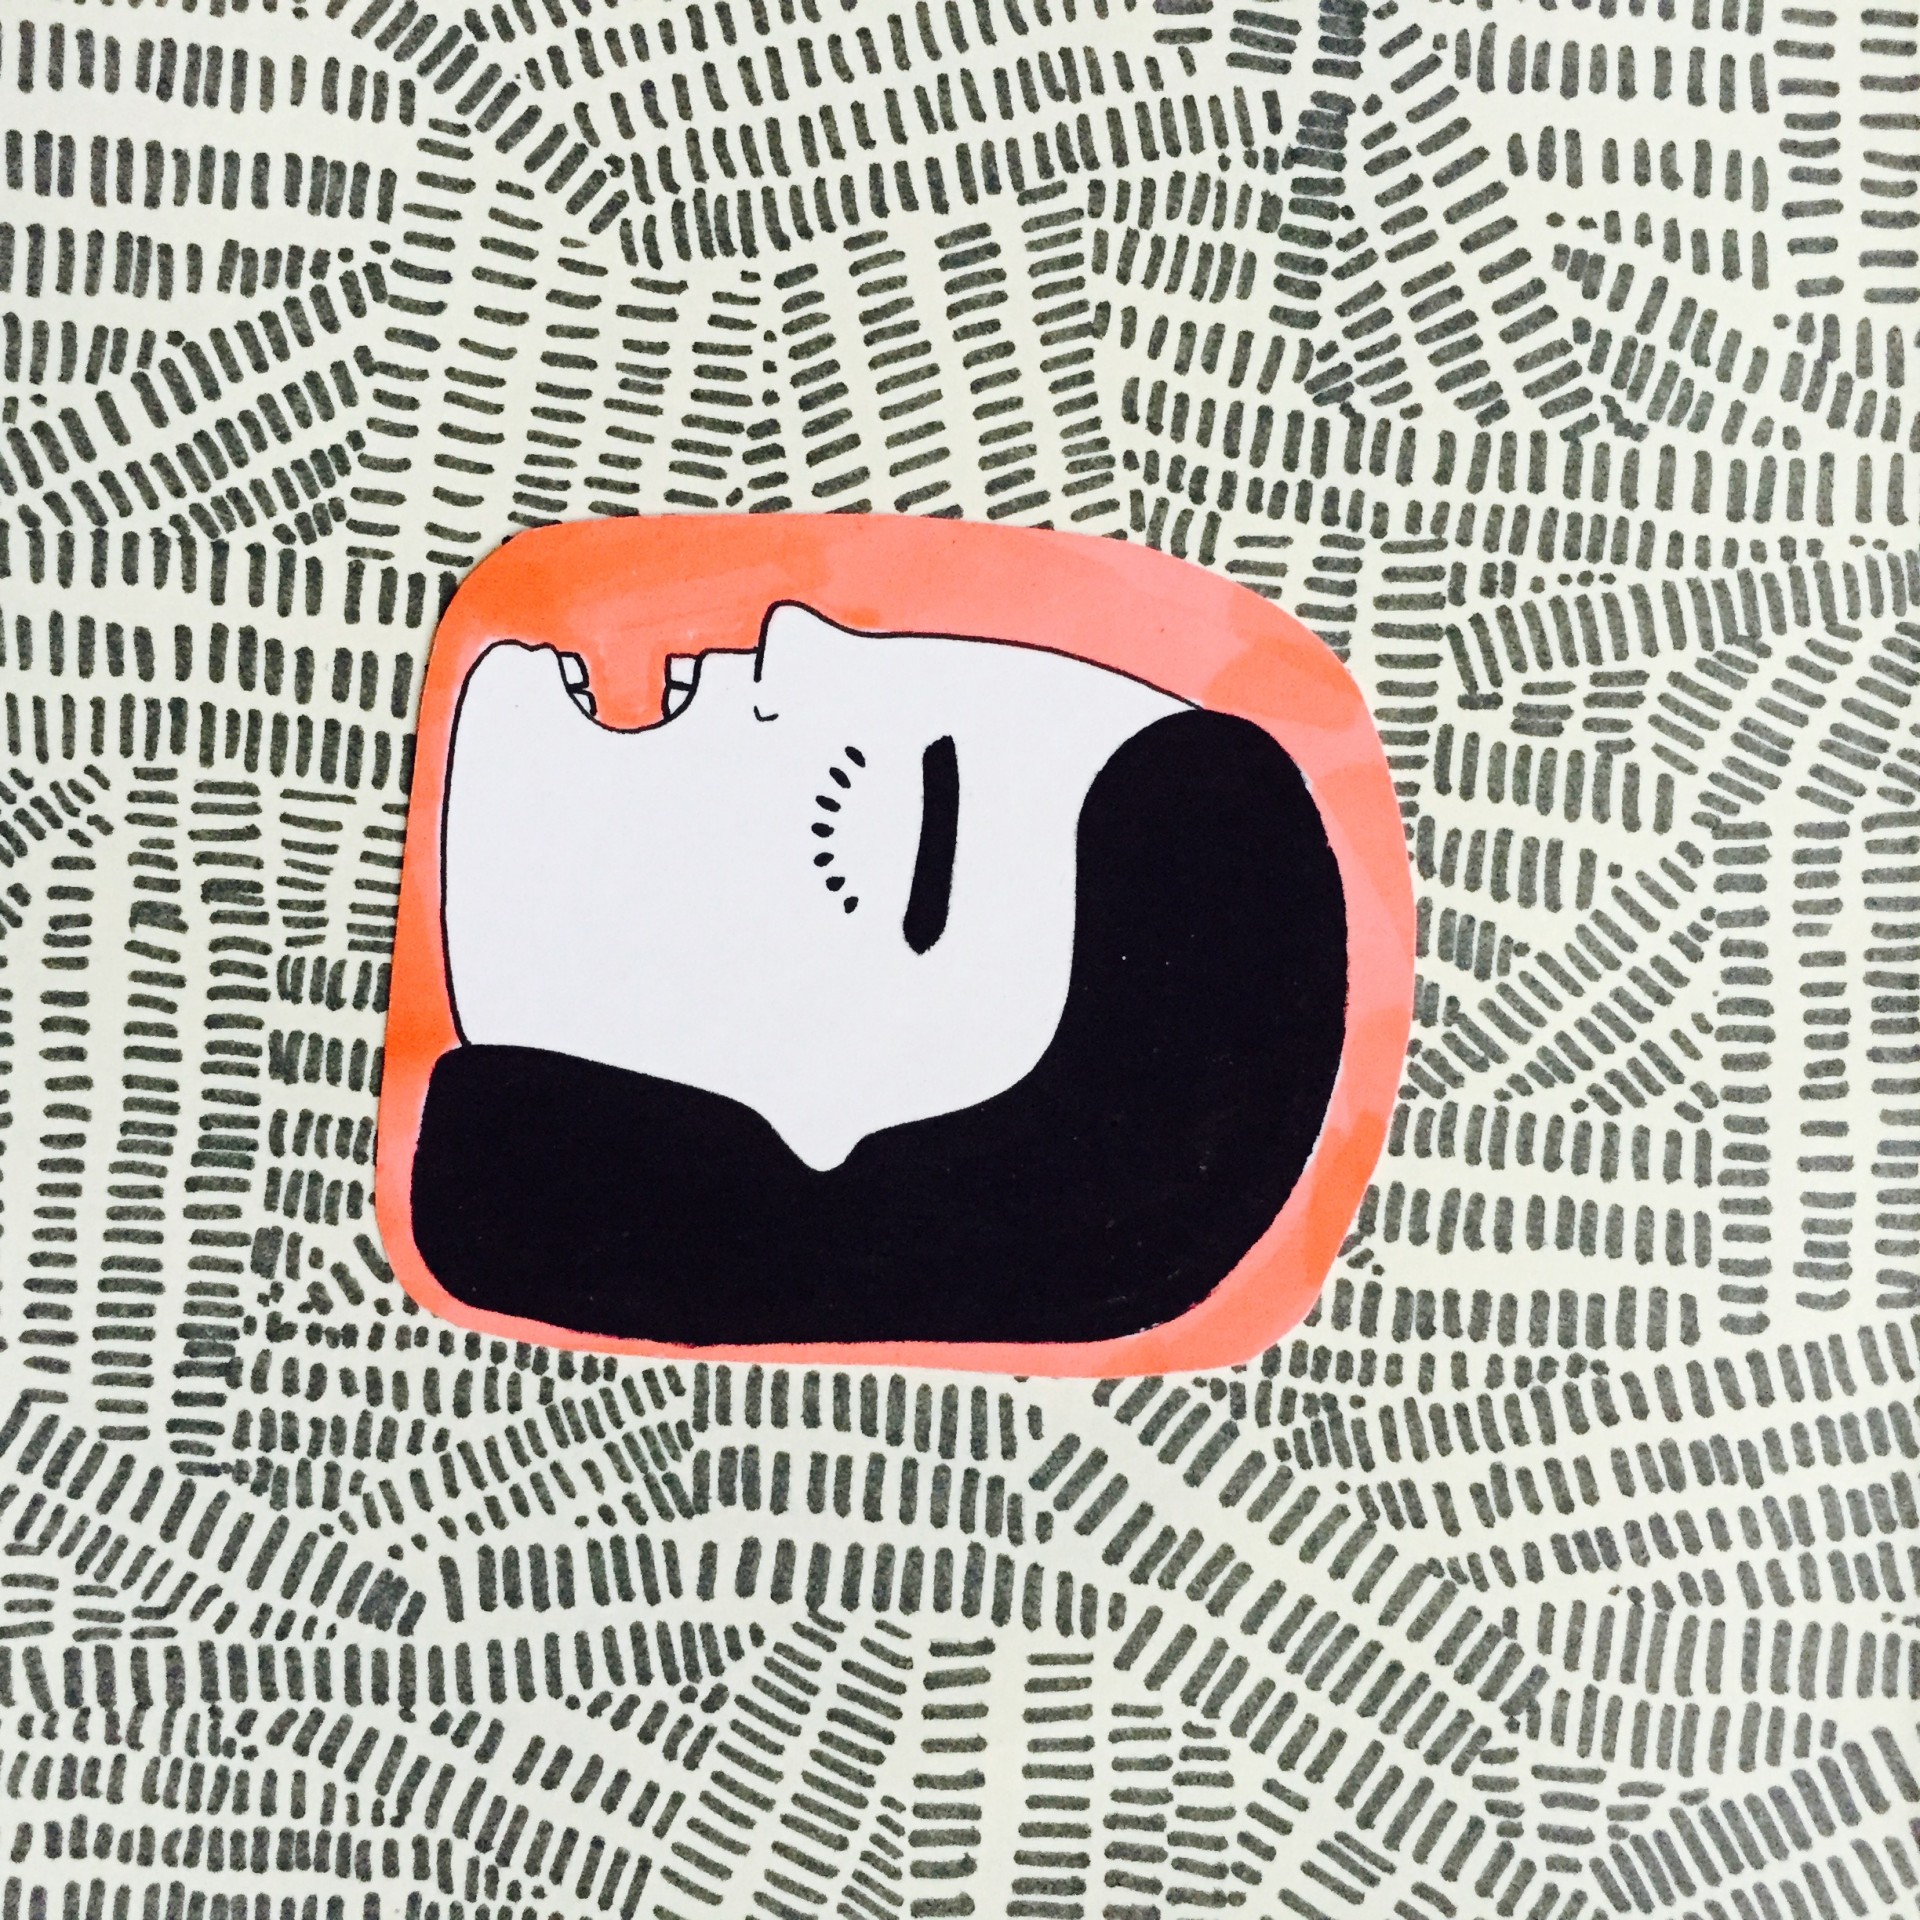 Single sticker of girl face shouting against decorative background. 